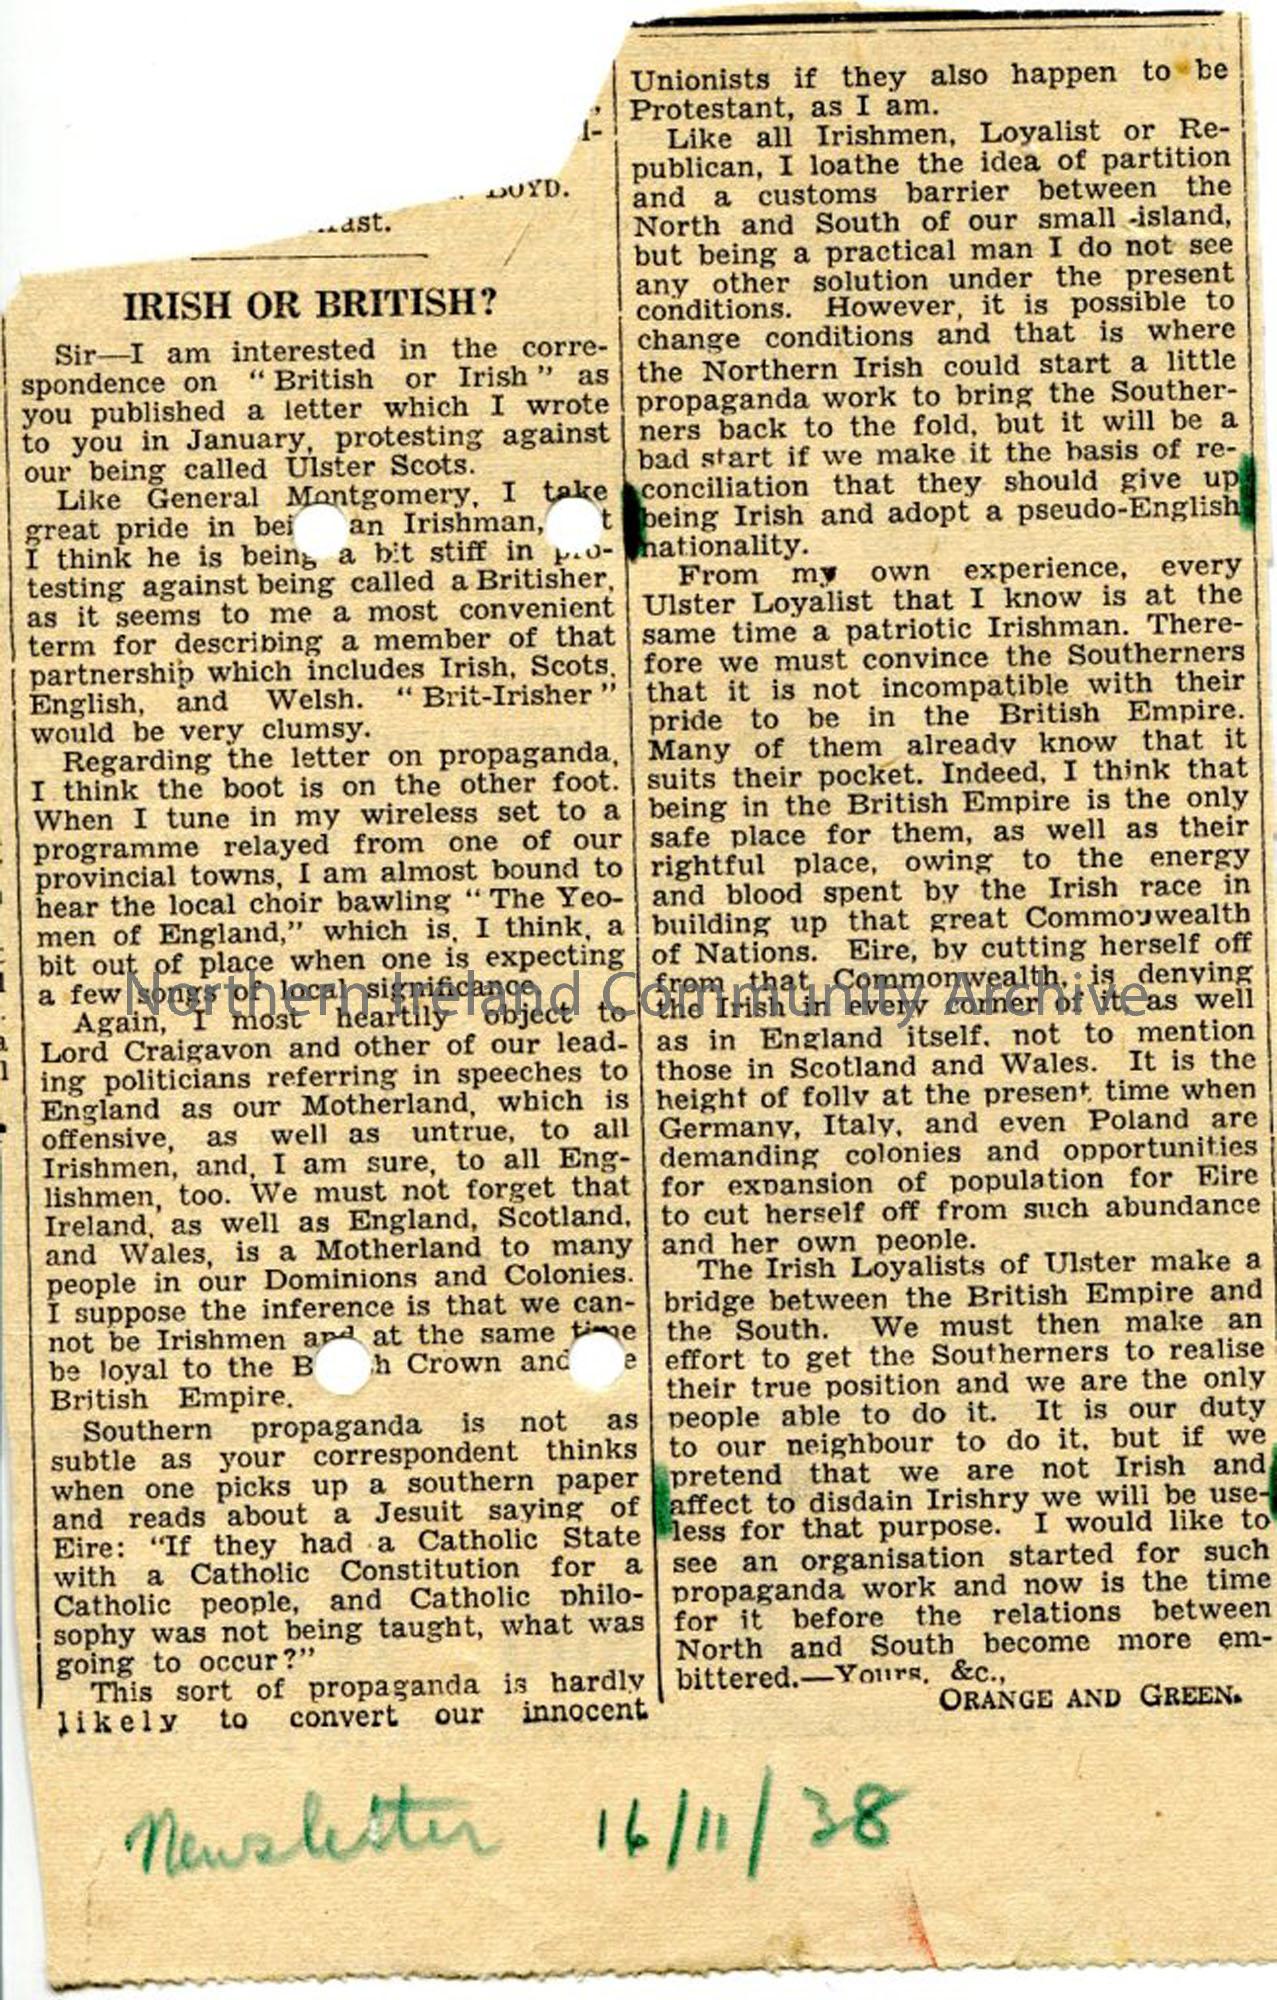 Newspaper cutting of letter from ‘Orange and Green’